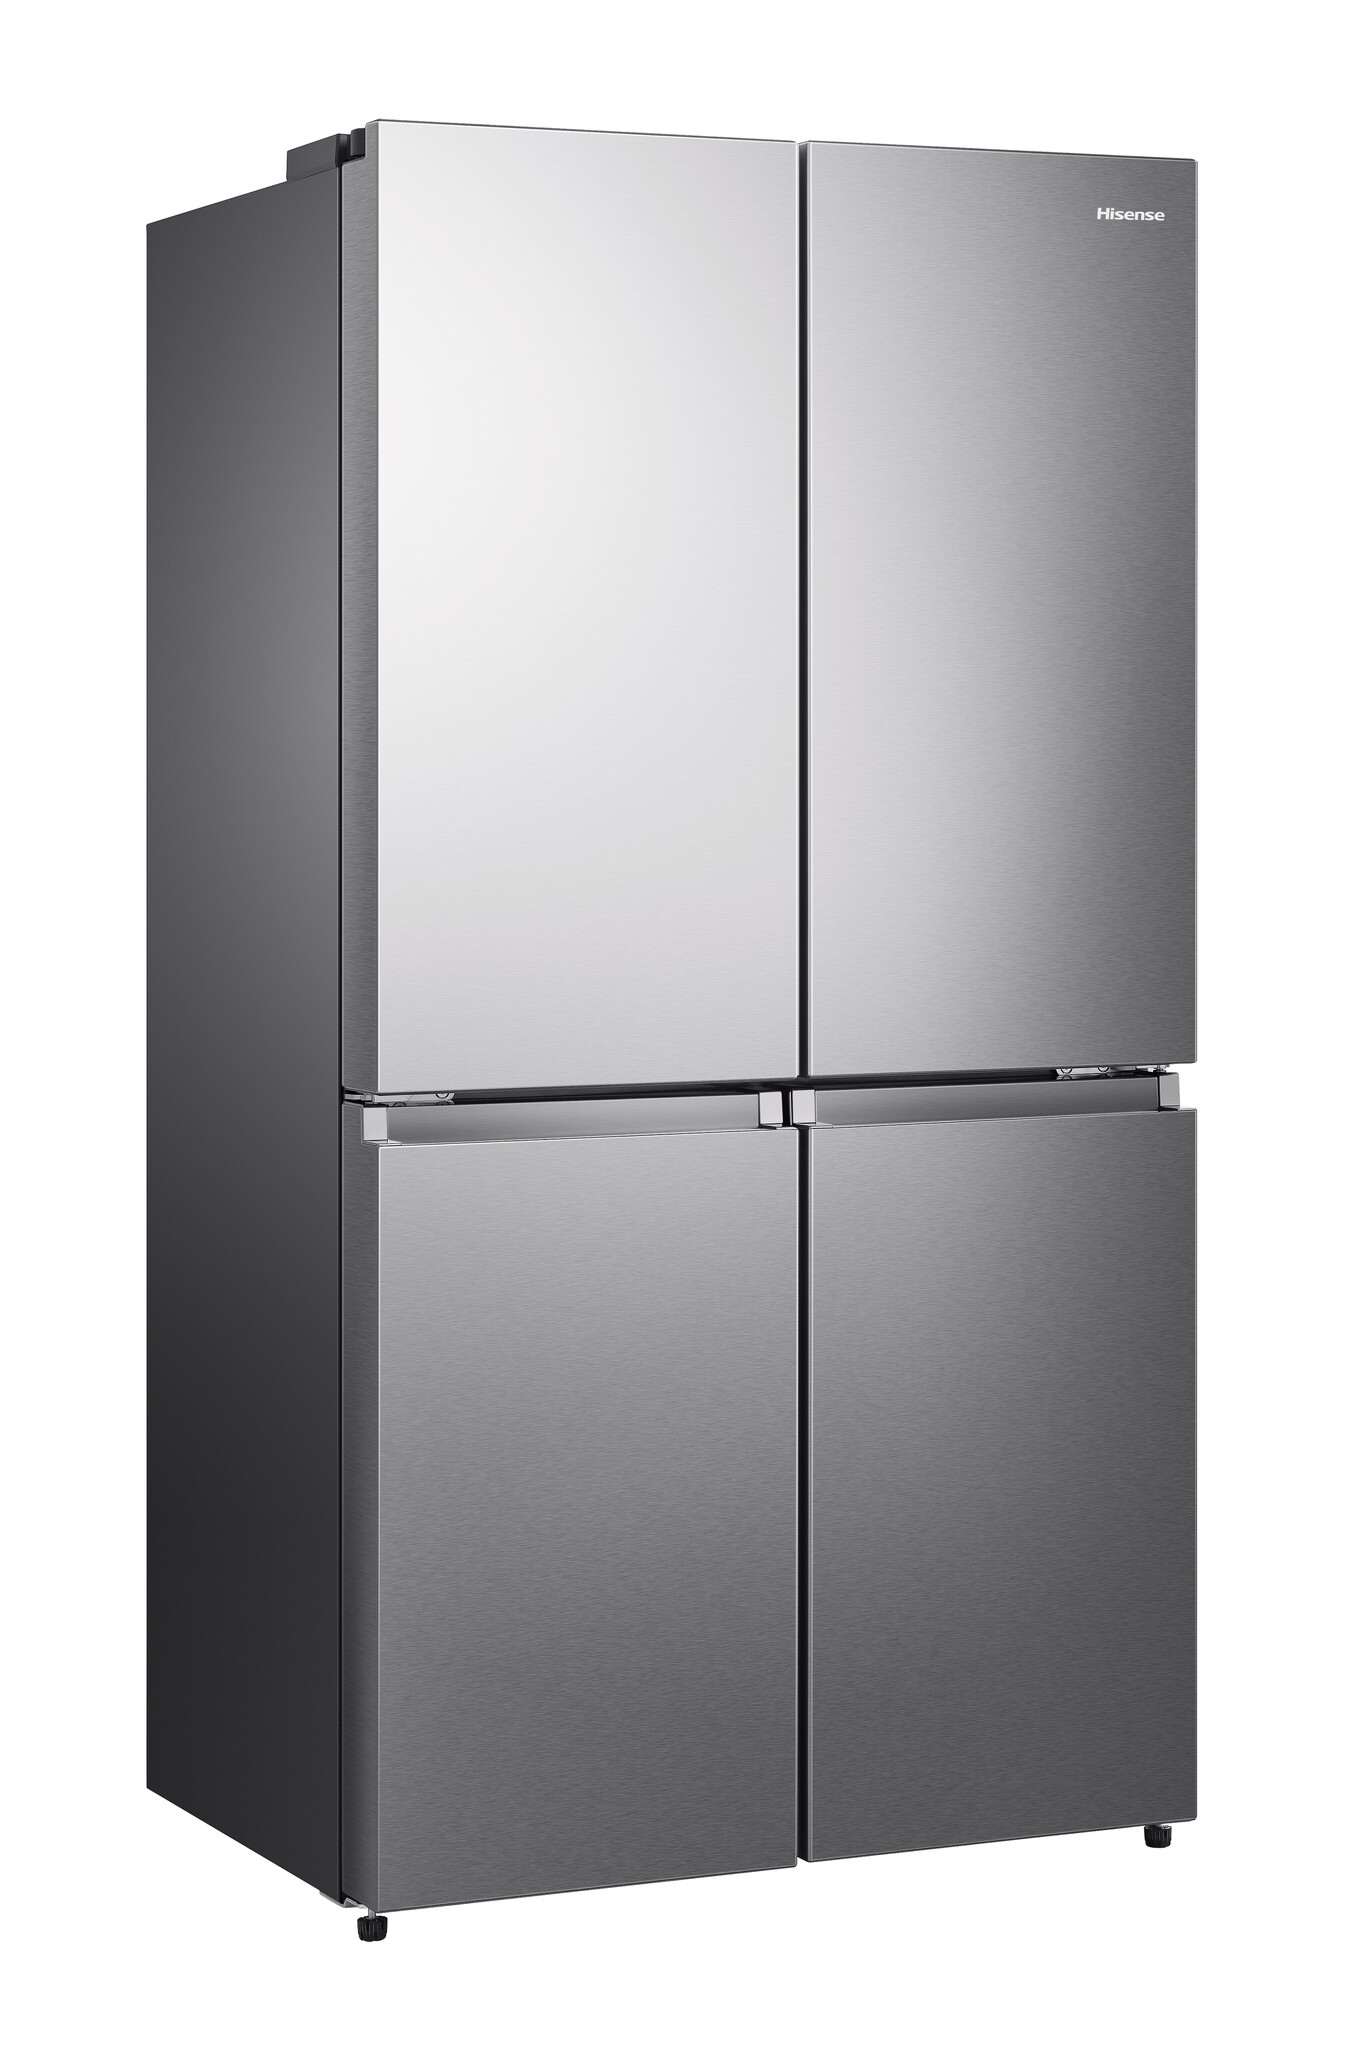 Hisense RQ758N4SASE Total No Frost American Fridge Freezer – Stainless Steel – E Rated #364880